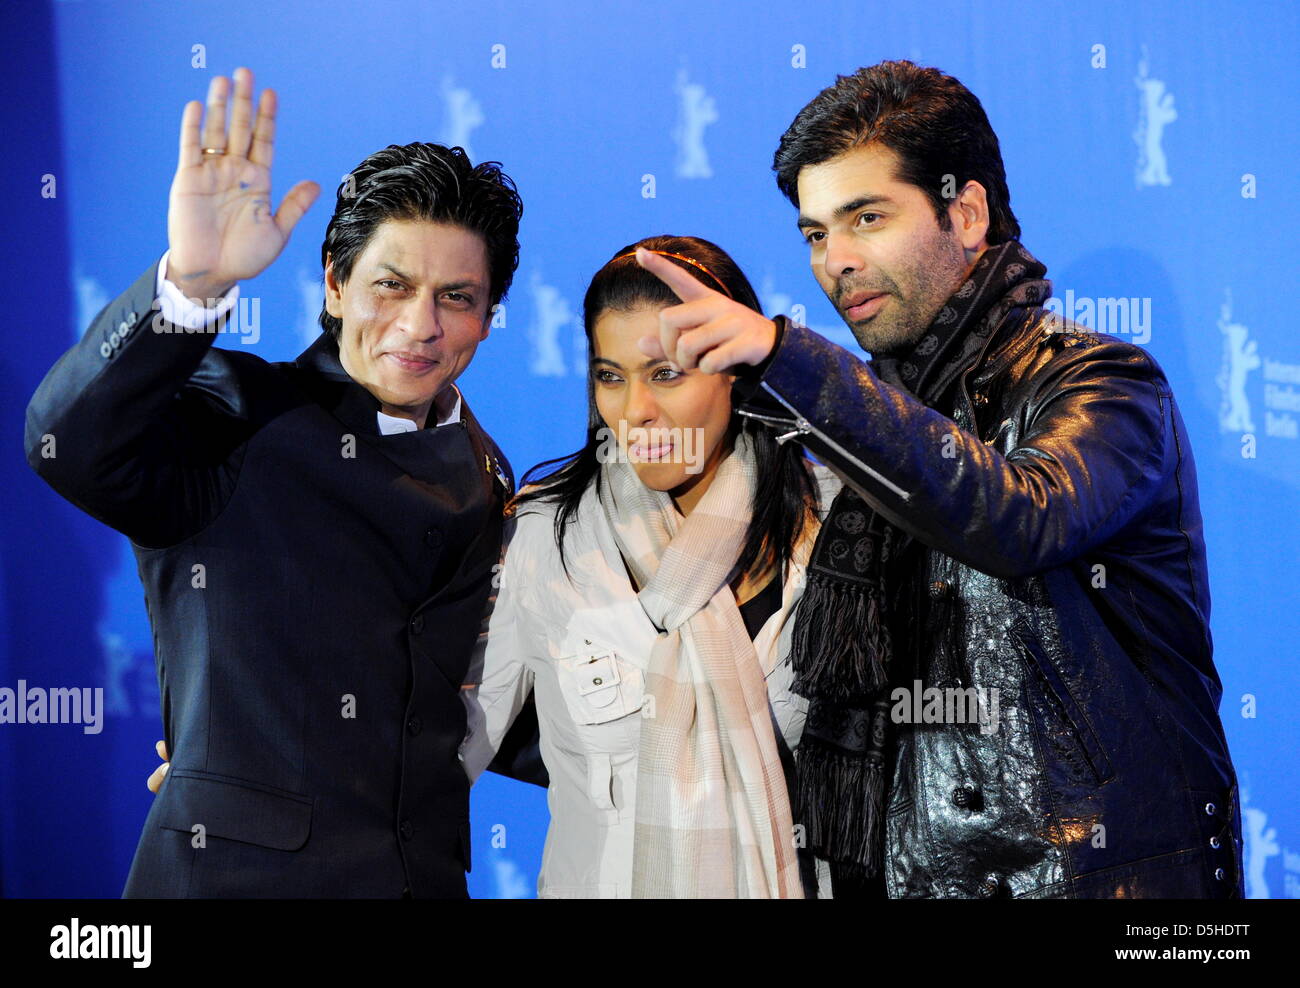 Indian actor Shah Rukh Khan (l-r), Indian actress Kajol Devgan and Indian director Karan Johar attend the photocall for the film 'My name is Khan' running in competition during the 60th Berlinale International Film Festival in Berlin, Germany, Friday, 12 February 2010. Photo: Soeren Stache dpa/lbn Stock Photo